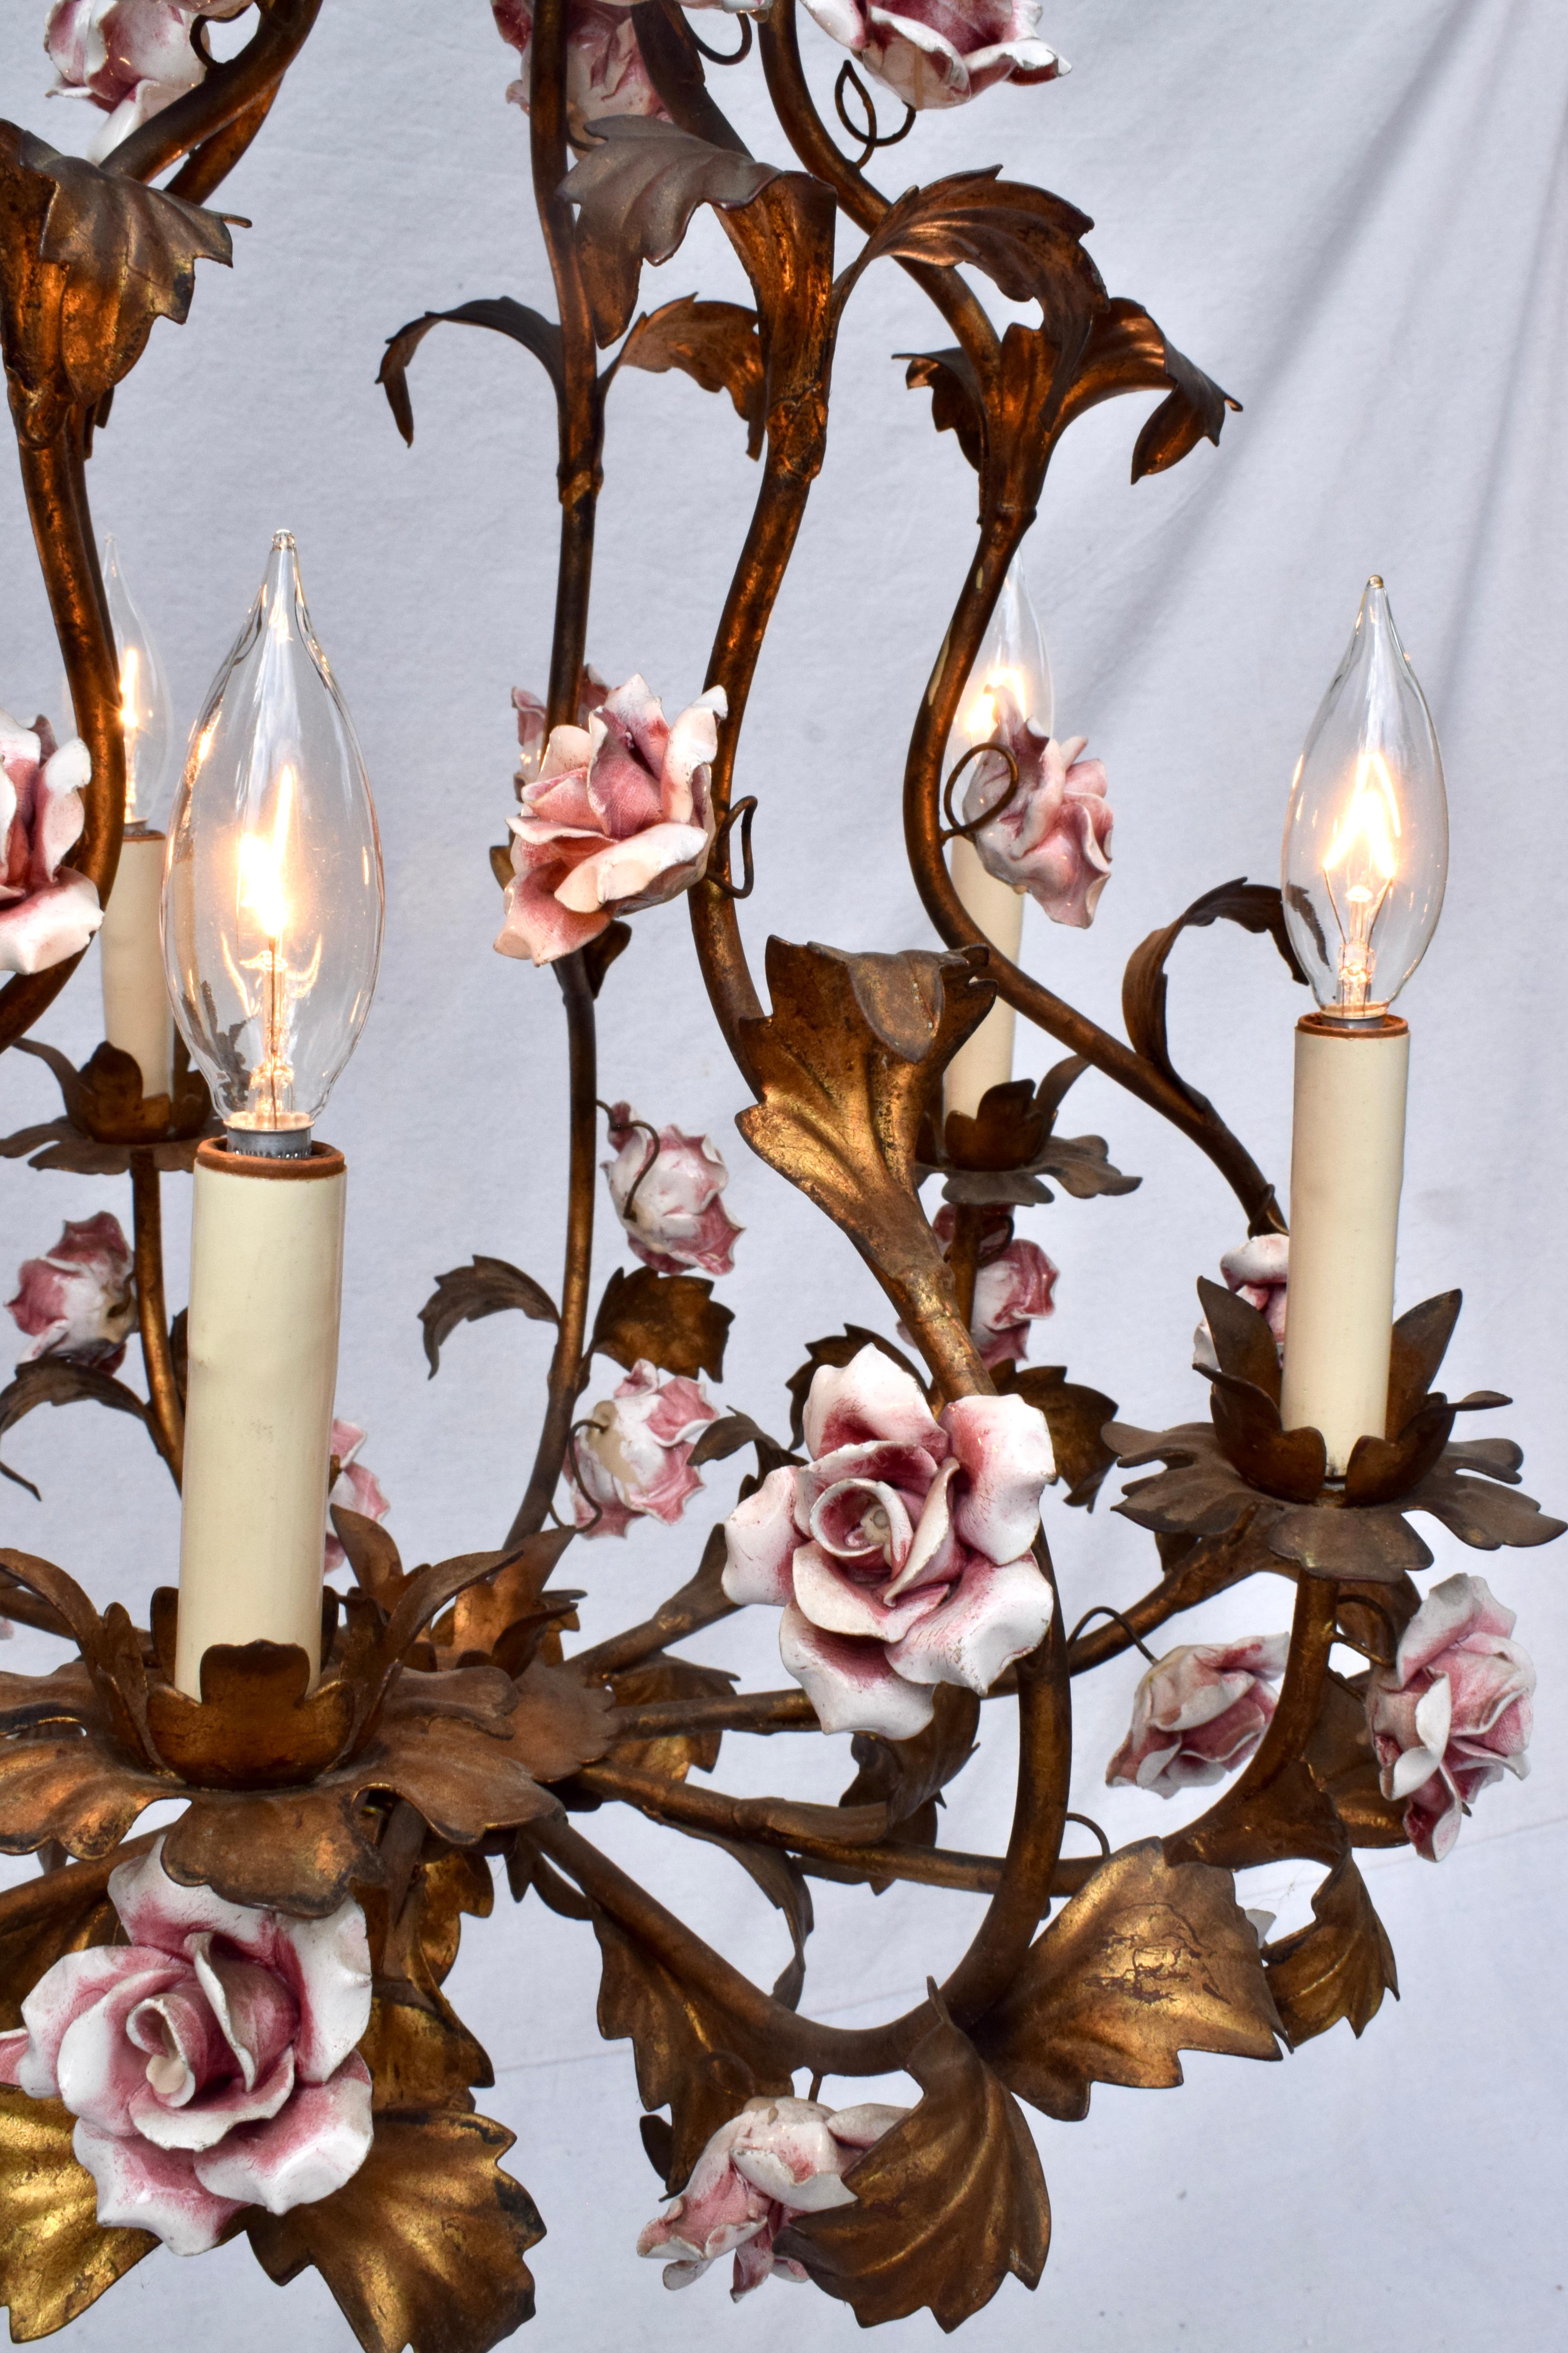 An exquisite patinated bronzed antique gold gilt Tole chandelier with 32 intricately hand crafted pink porcelain roses. Six arms & lights, Italian mid 20th Century with newer hardwiring.